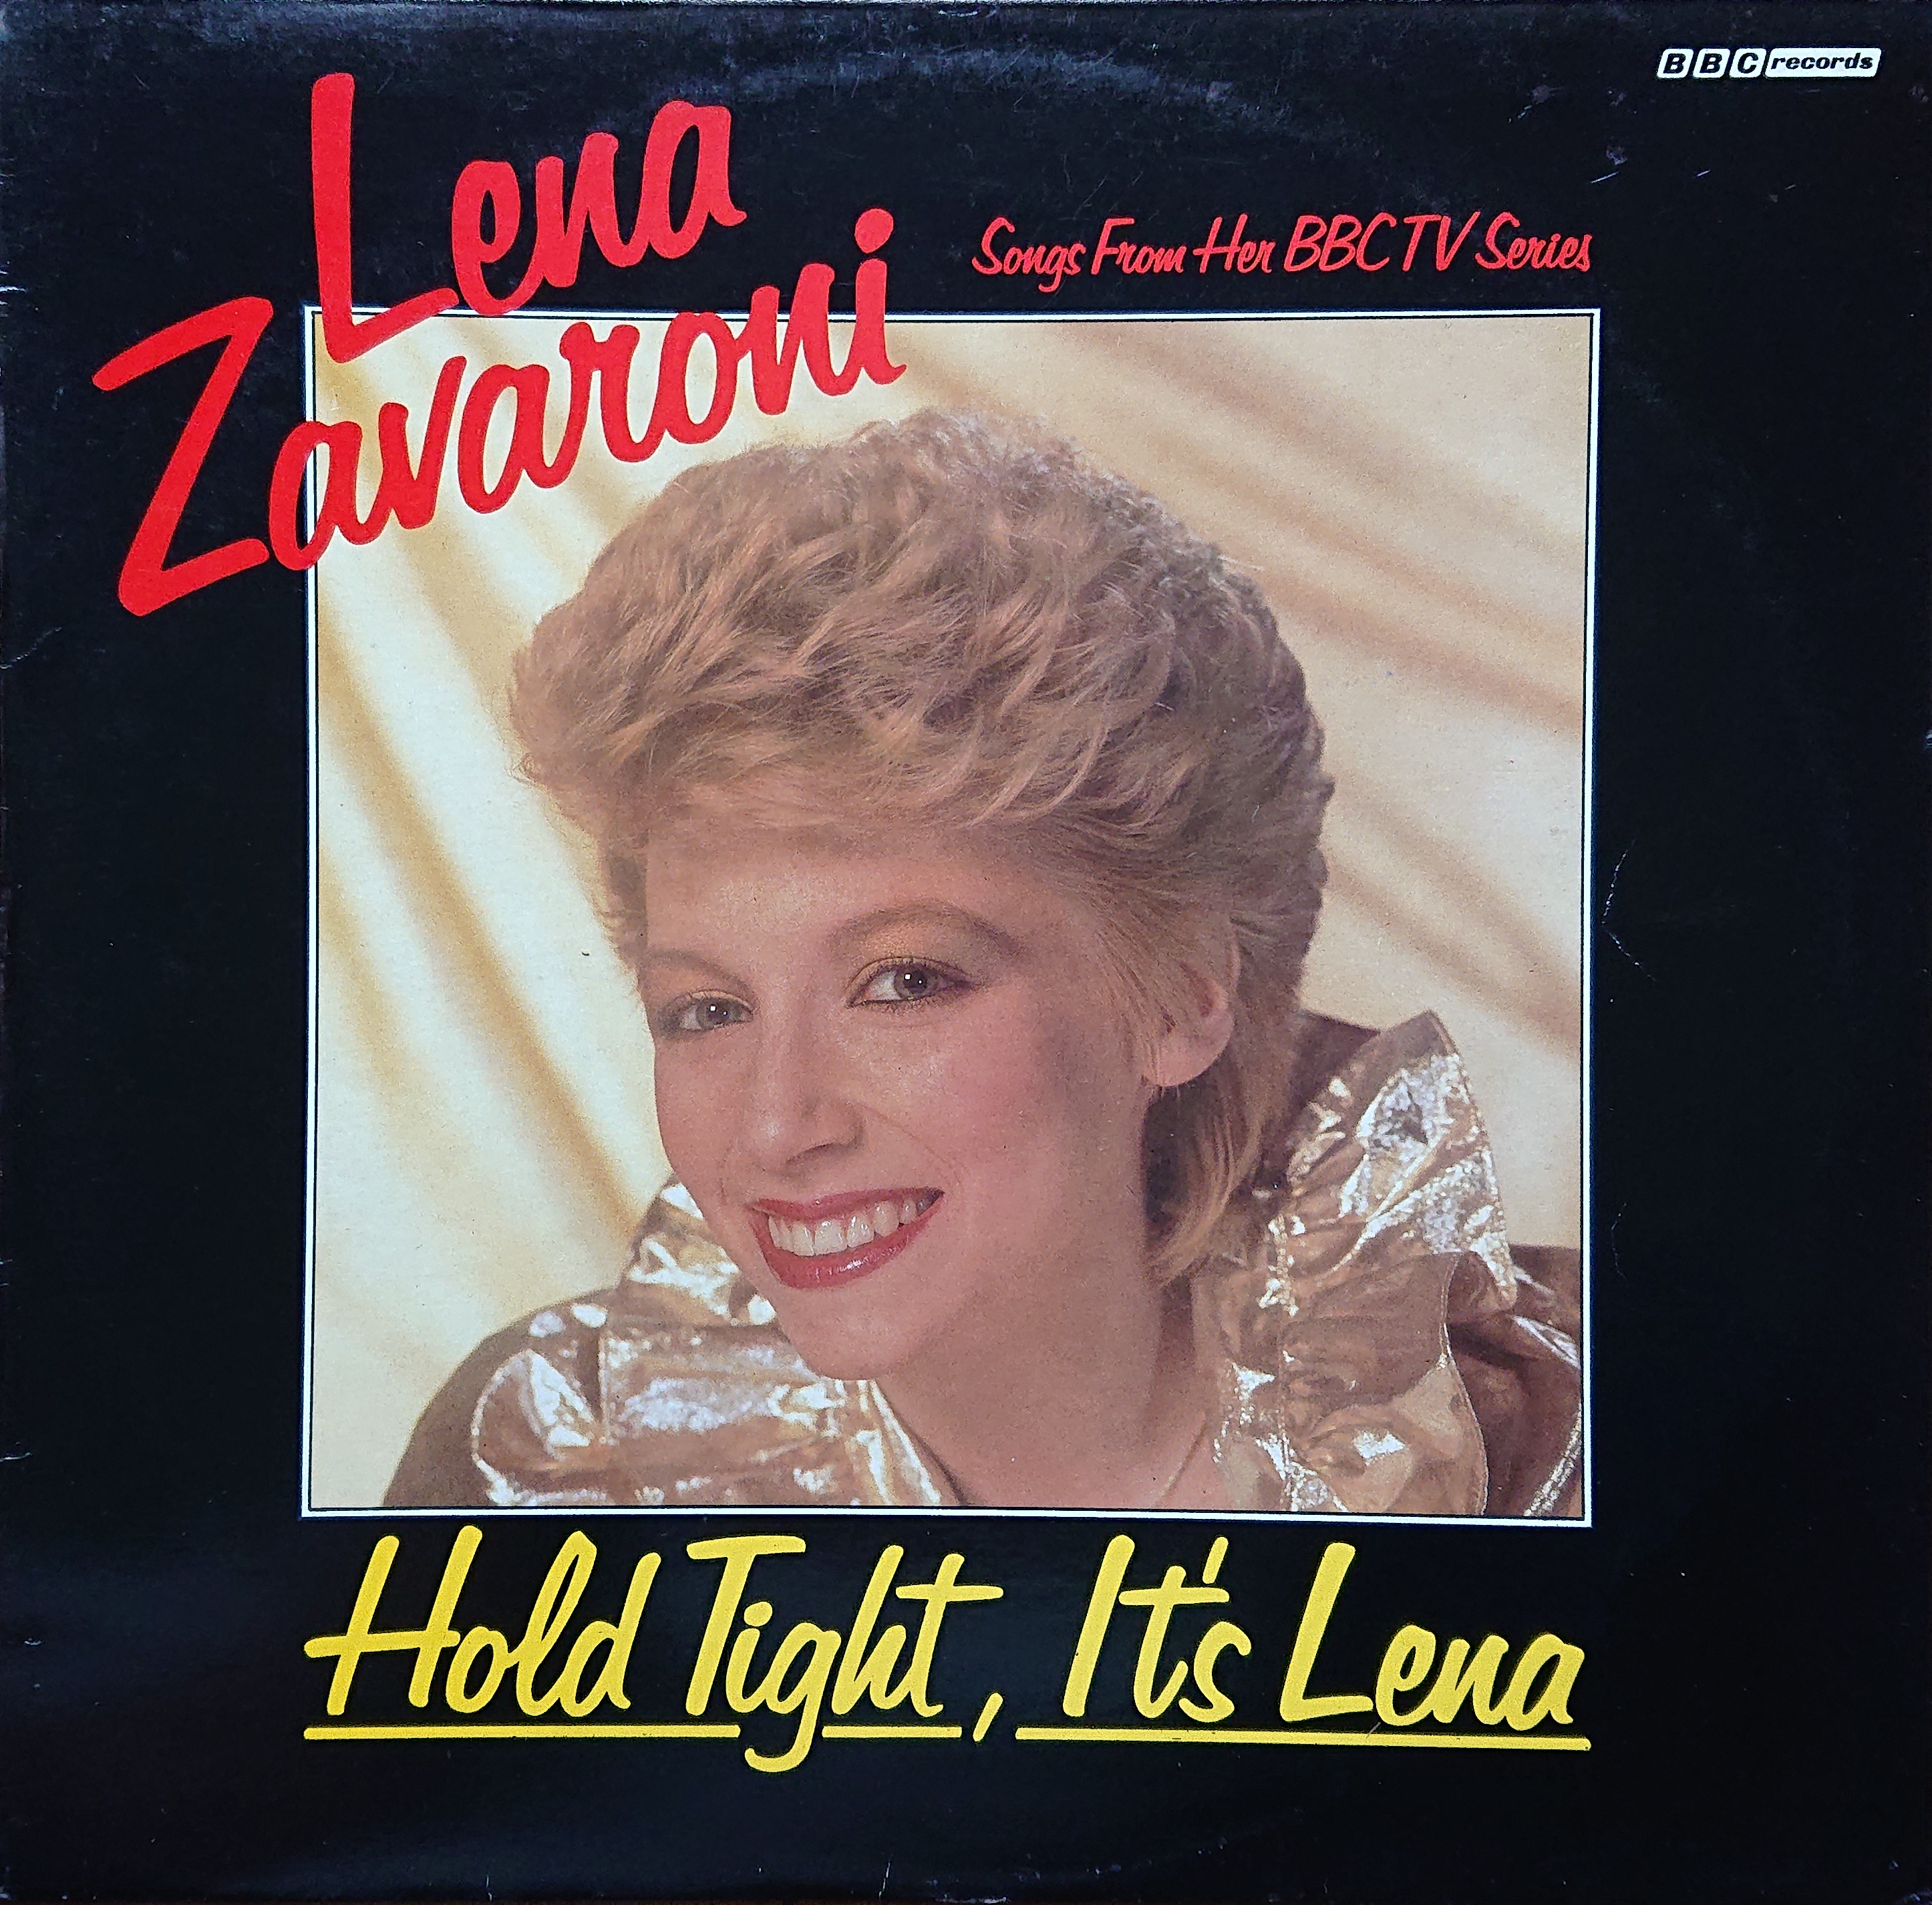 Picture of REB 443 Hold tight - Lena Zavaroni by artist Lena Zavaroni from the BBC albums - Records and Tapes library